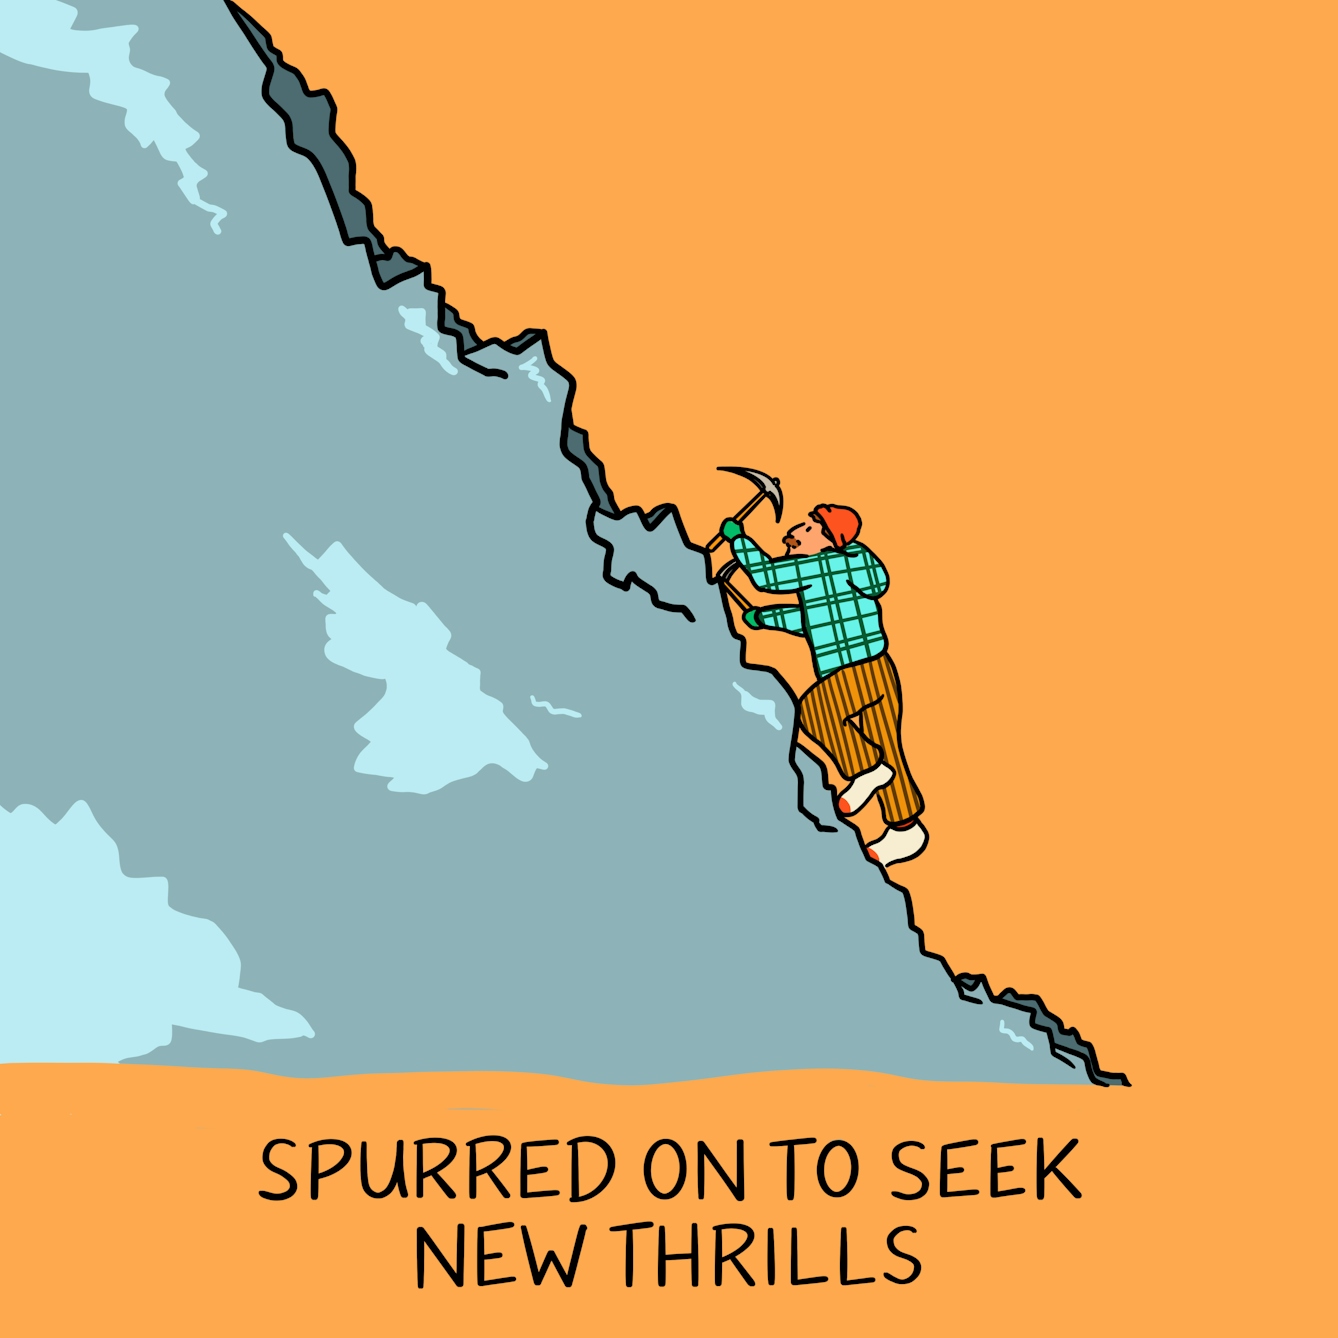 Panel 3 of a four-panel comic drawn digitally: a white man with a moustache, corduroy trousers and a plaid hoodie uses a pickaxe to scale a mountain. The caption text reads "spurred on to seek new thrills"